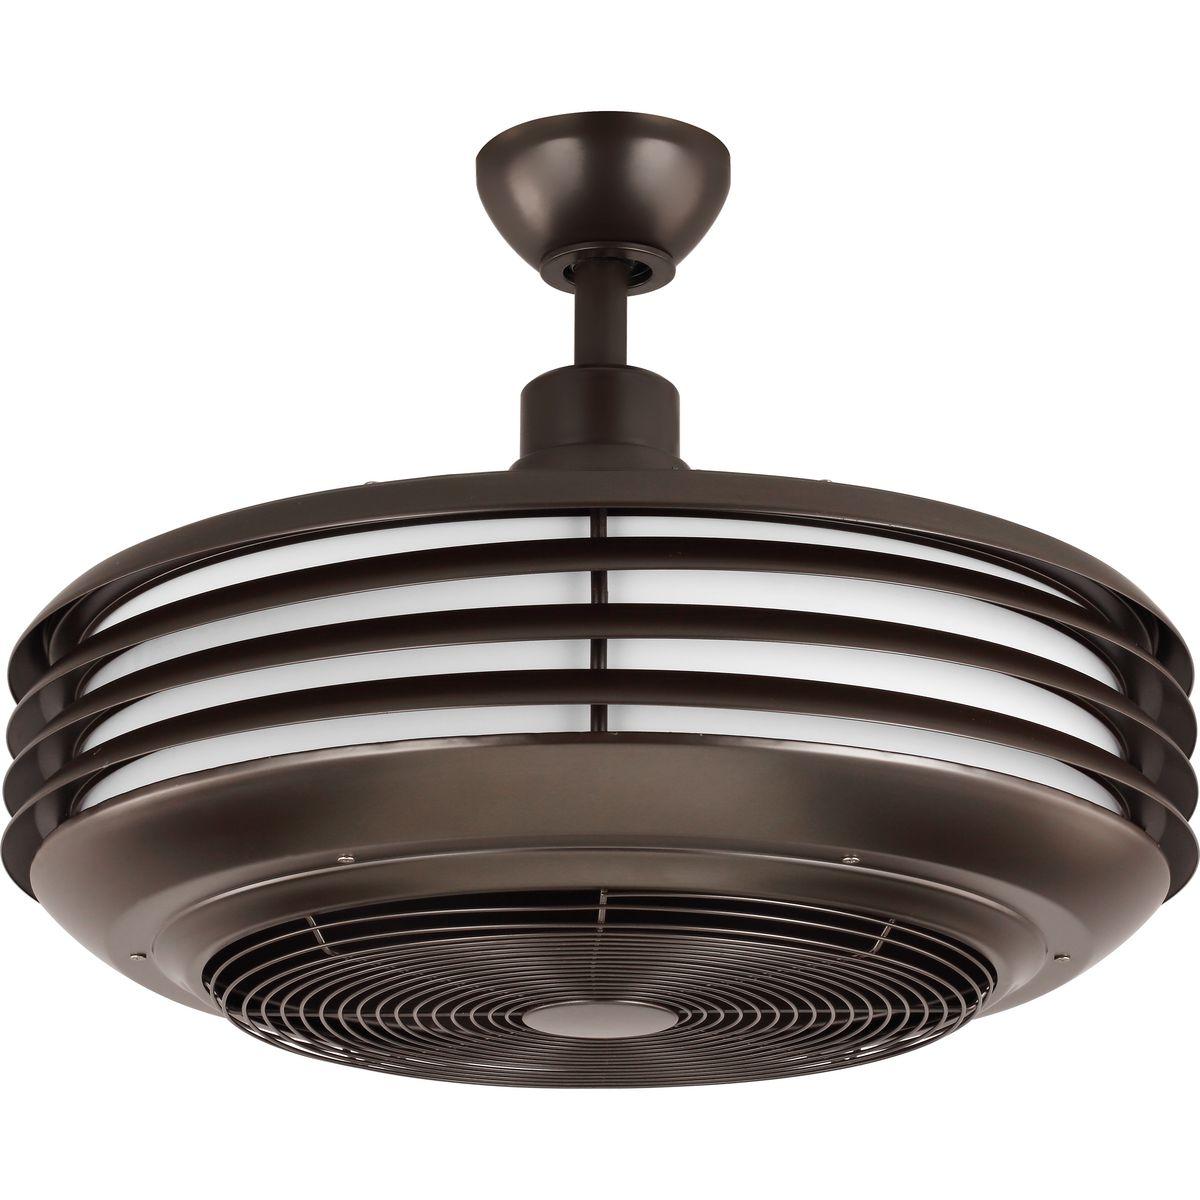 Hubbell P2594-12930K Sanford delivers ultra powerful air movement and energy efficient illumination packaged in a modern design. Ideal for both interior and outdoor settings, this fan adds a contemporary style to porches, foyers, bath and vanity areas providing a wide range o